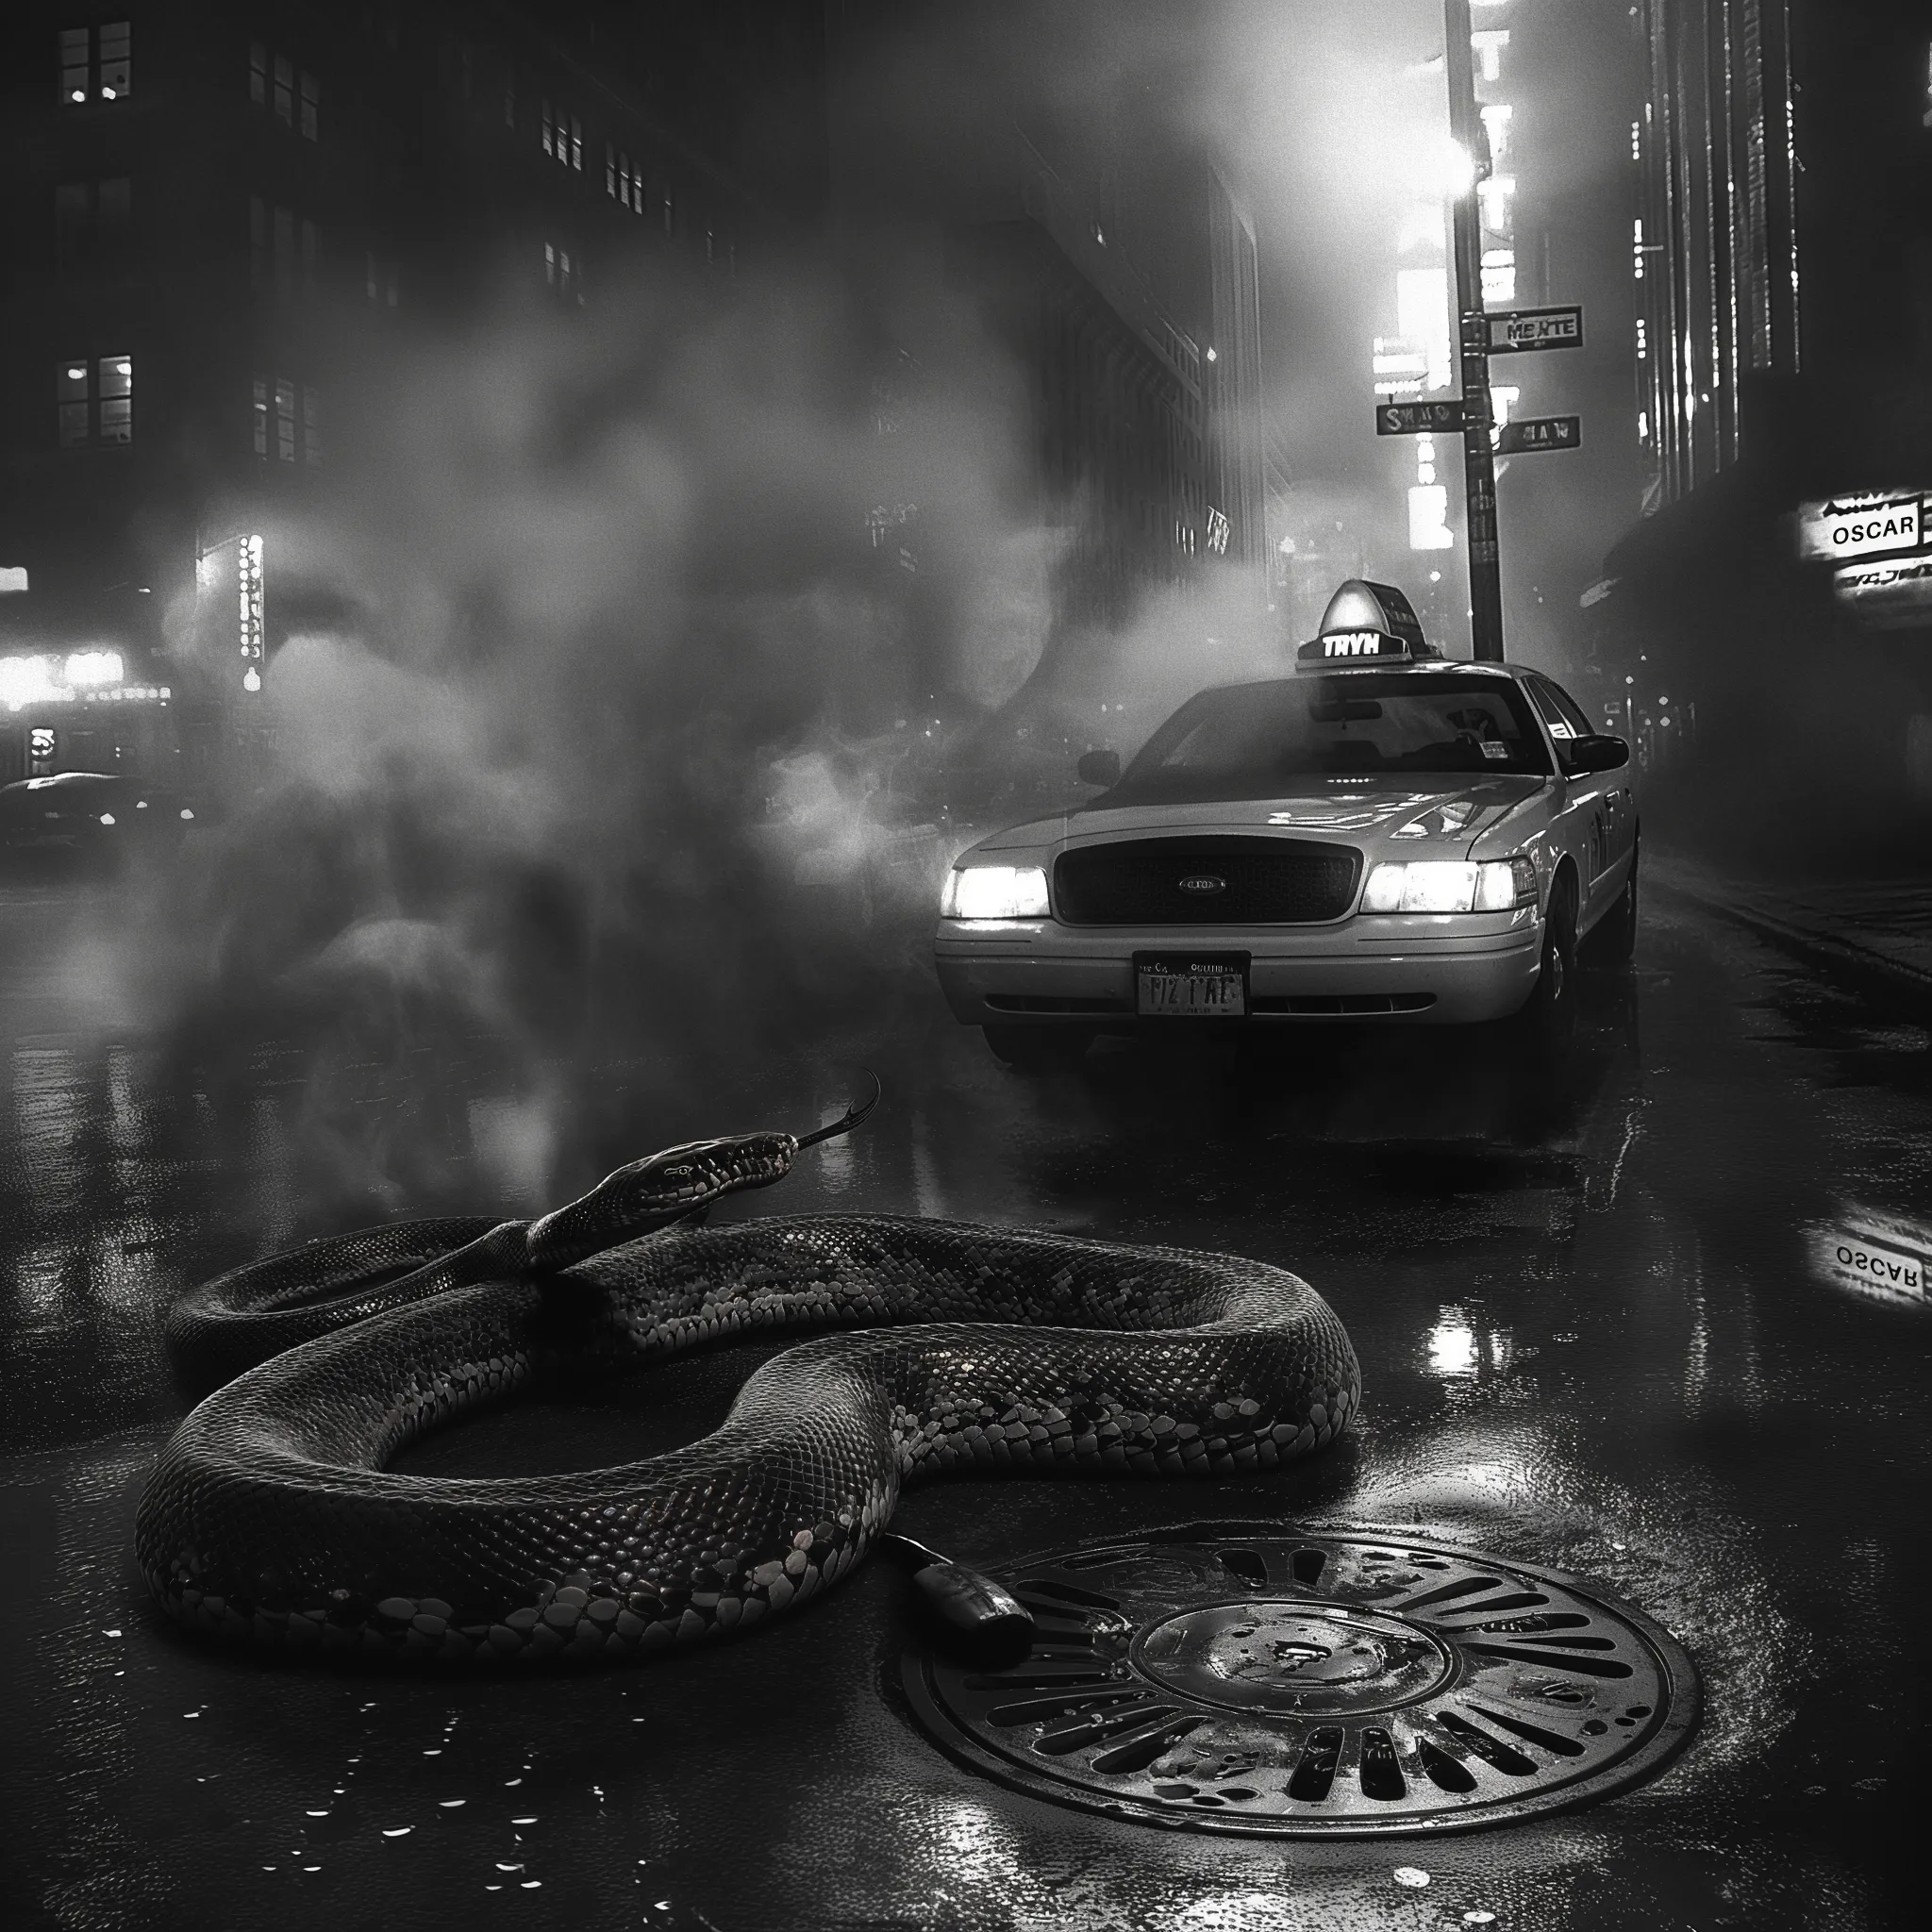 Taxi cab in the smoke of a night city scene and a giant Anaconda snake sitting on the road